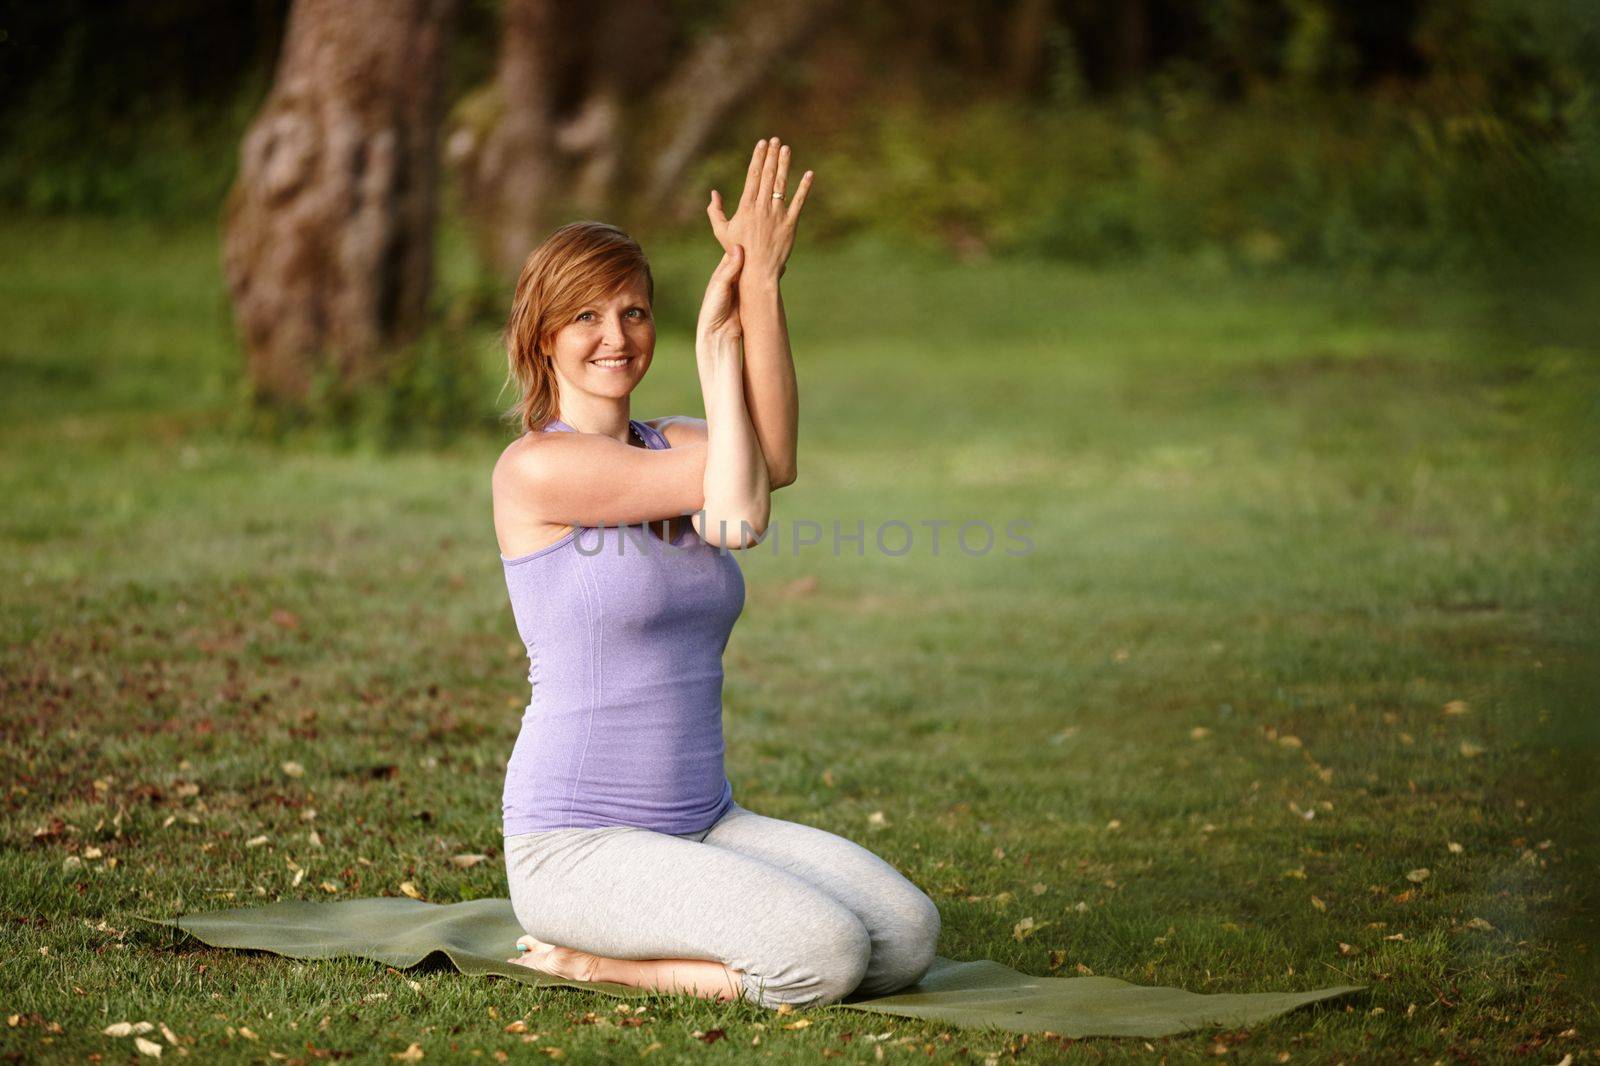 Yoga at the park. Portrait of an attractive woman doing yoga at the park